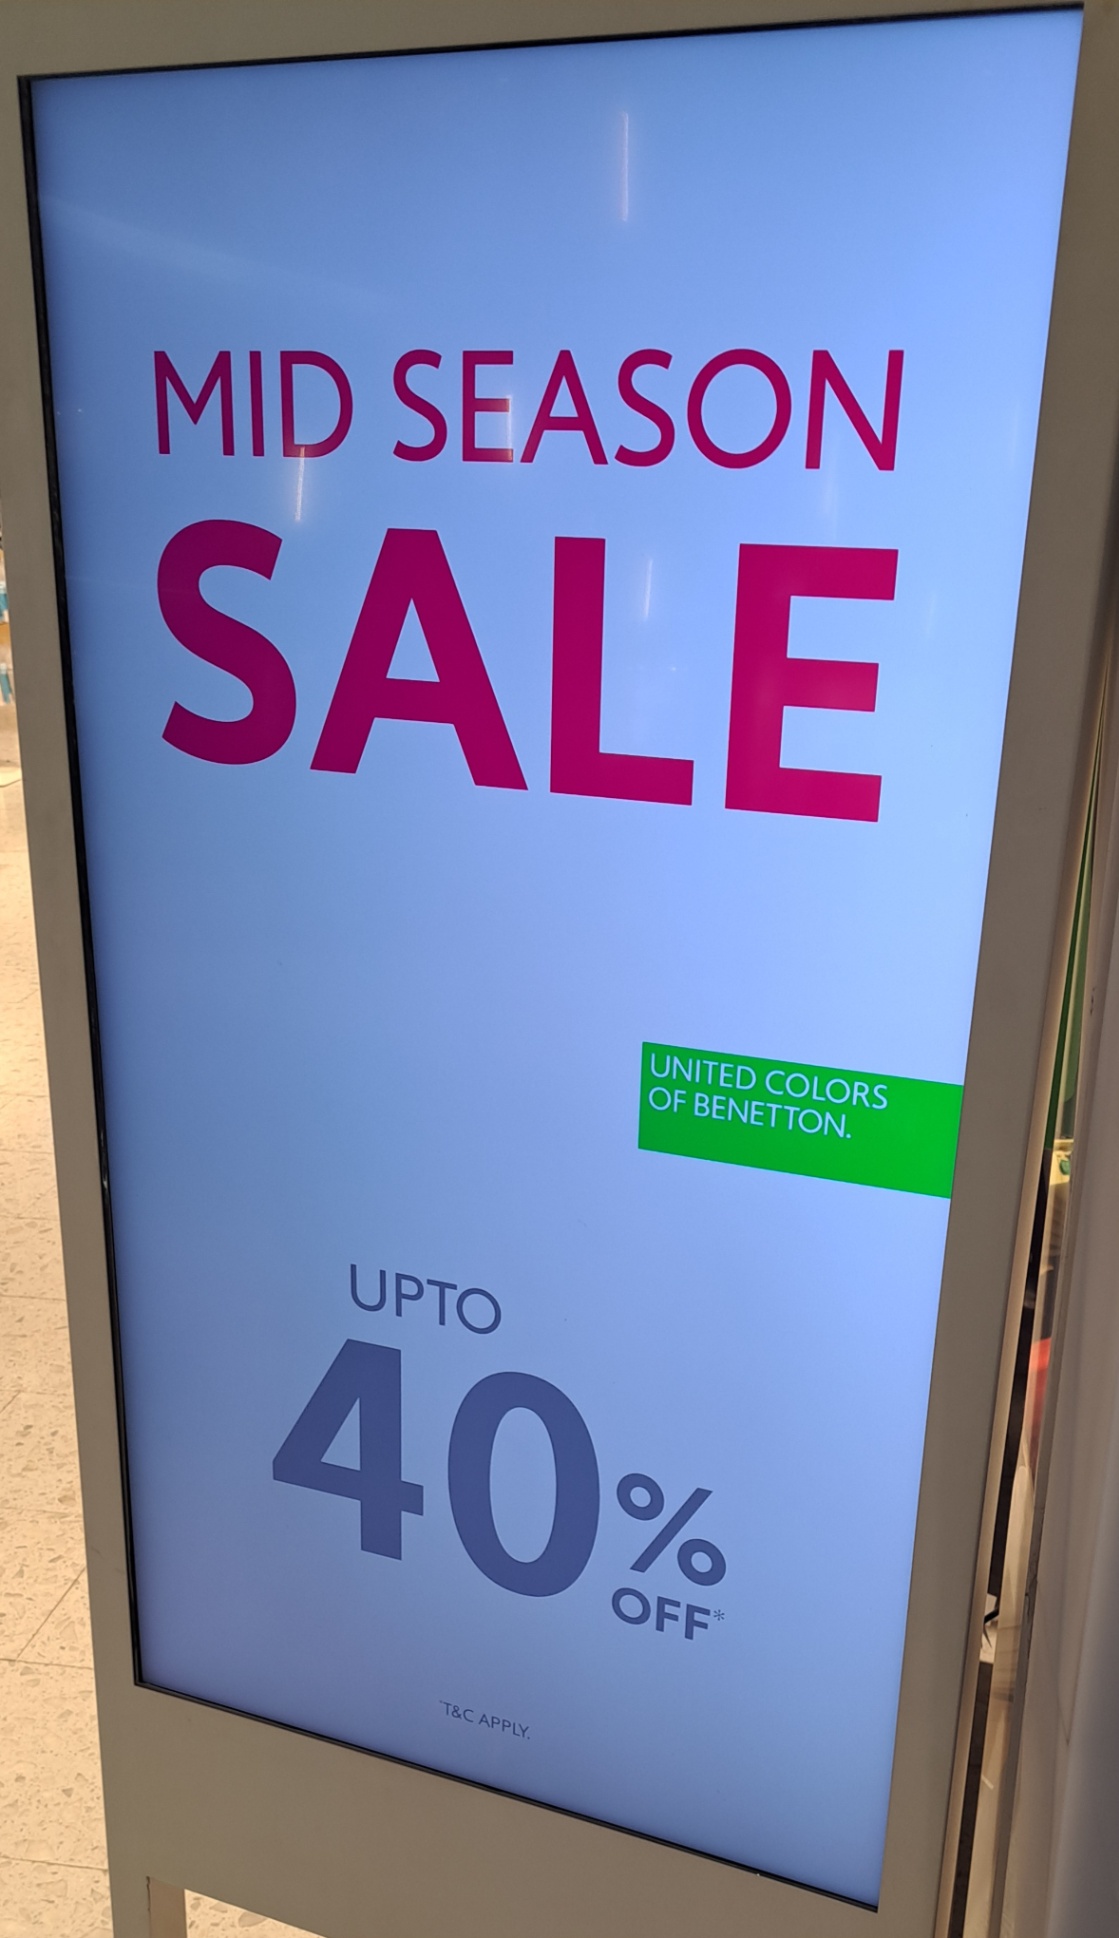 New Deal - Upto 40% off @UNITED COLORS OF BENETTON DB CITY MALL, Bhopal